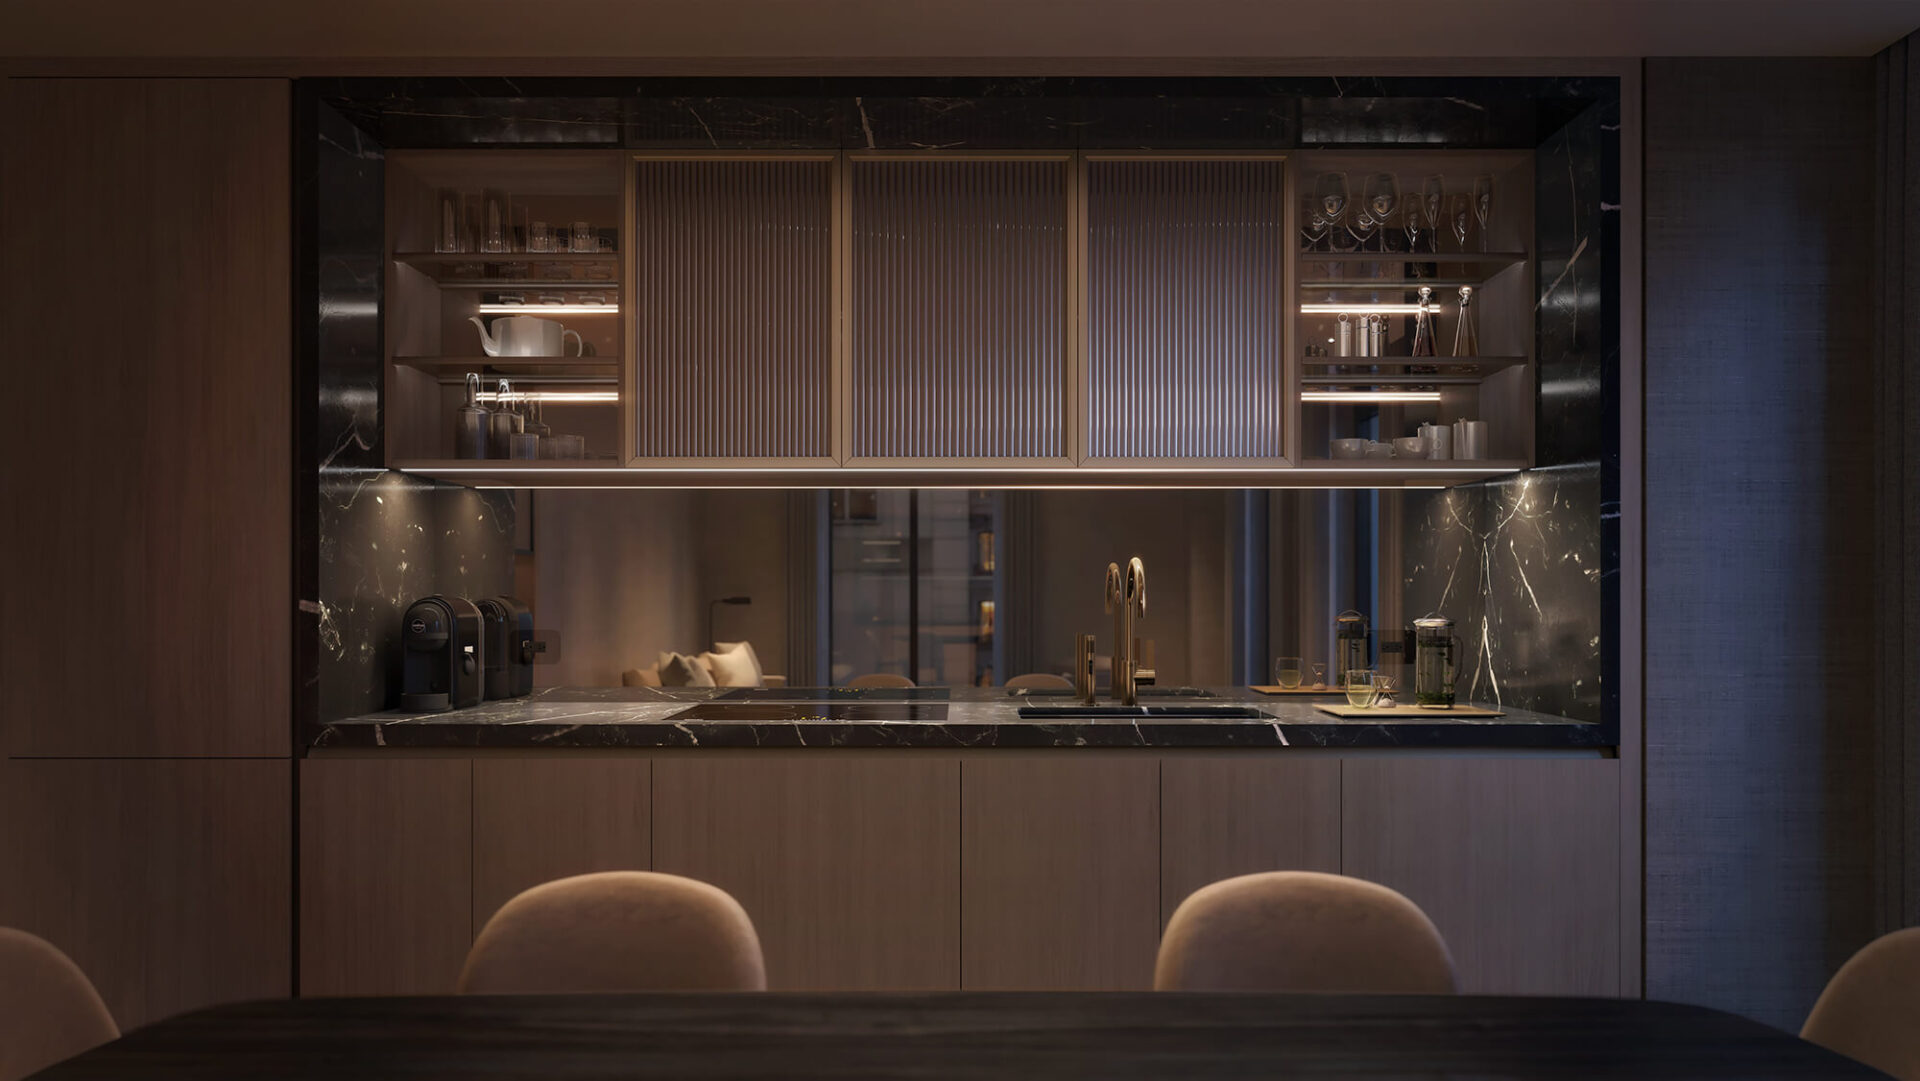 mandarin oriental 5th ave rendering of a kitchen and a dining room table